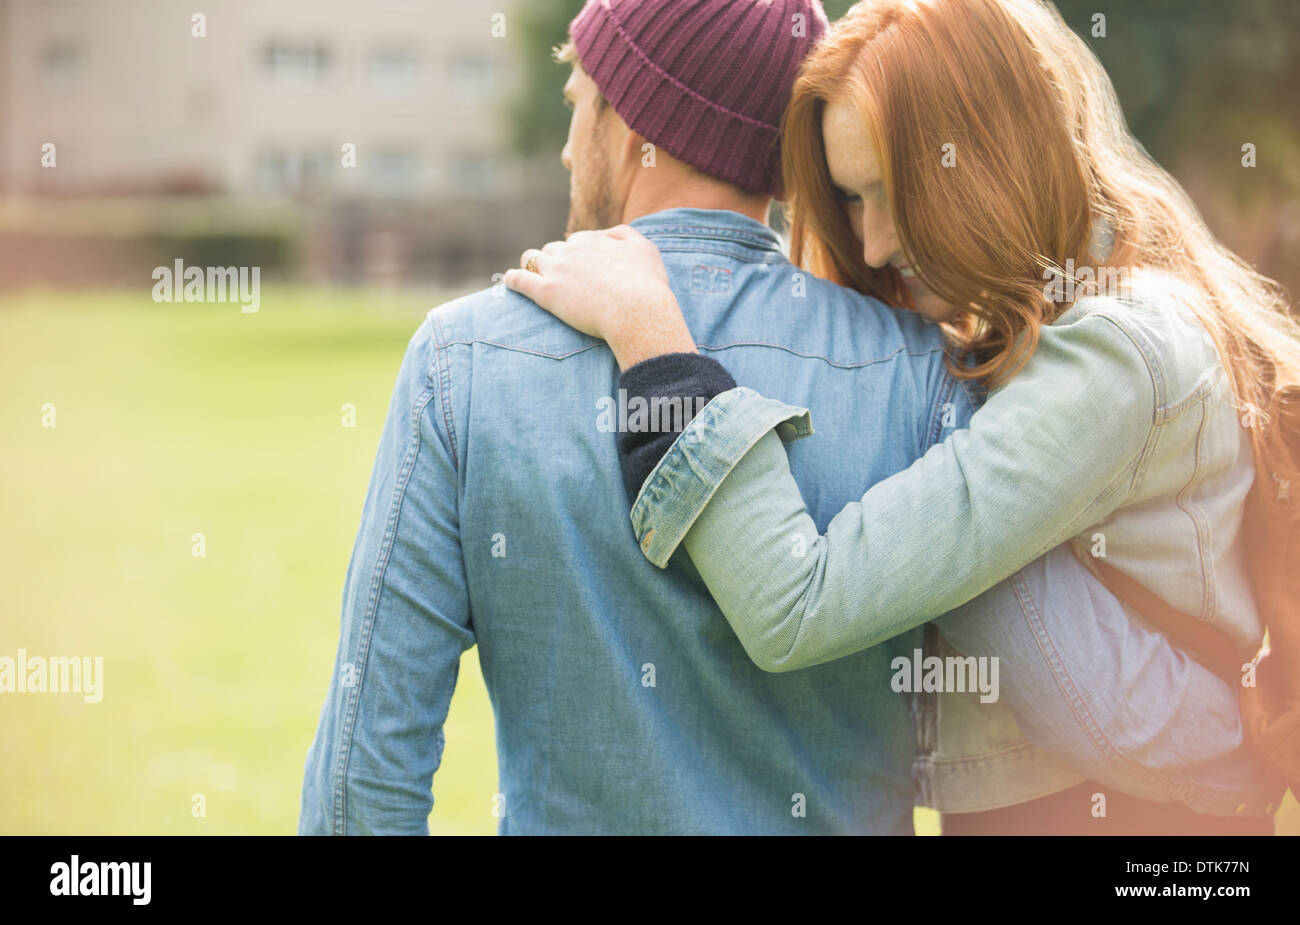 Couple hugging in park Banque D'Images